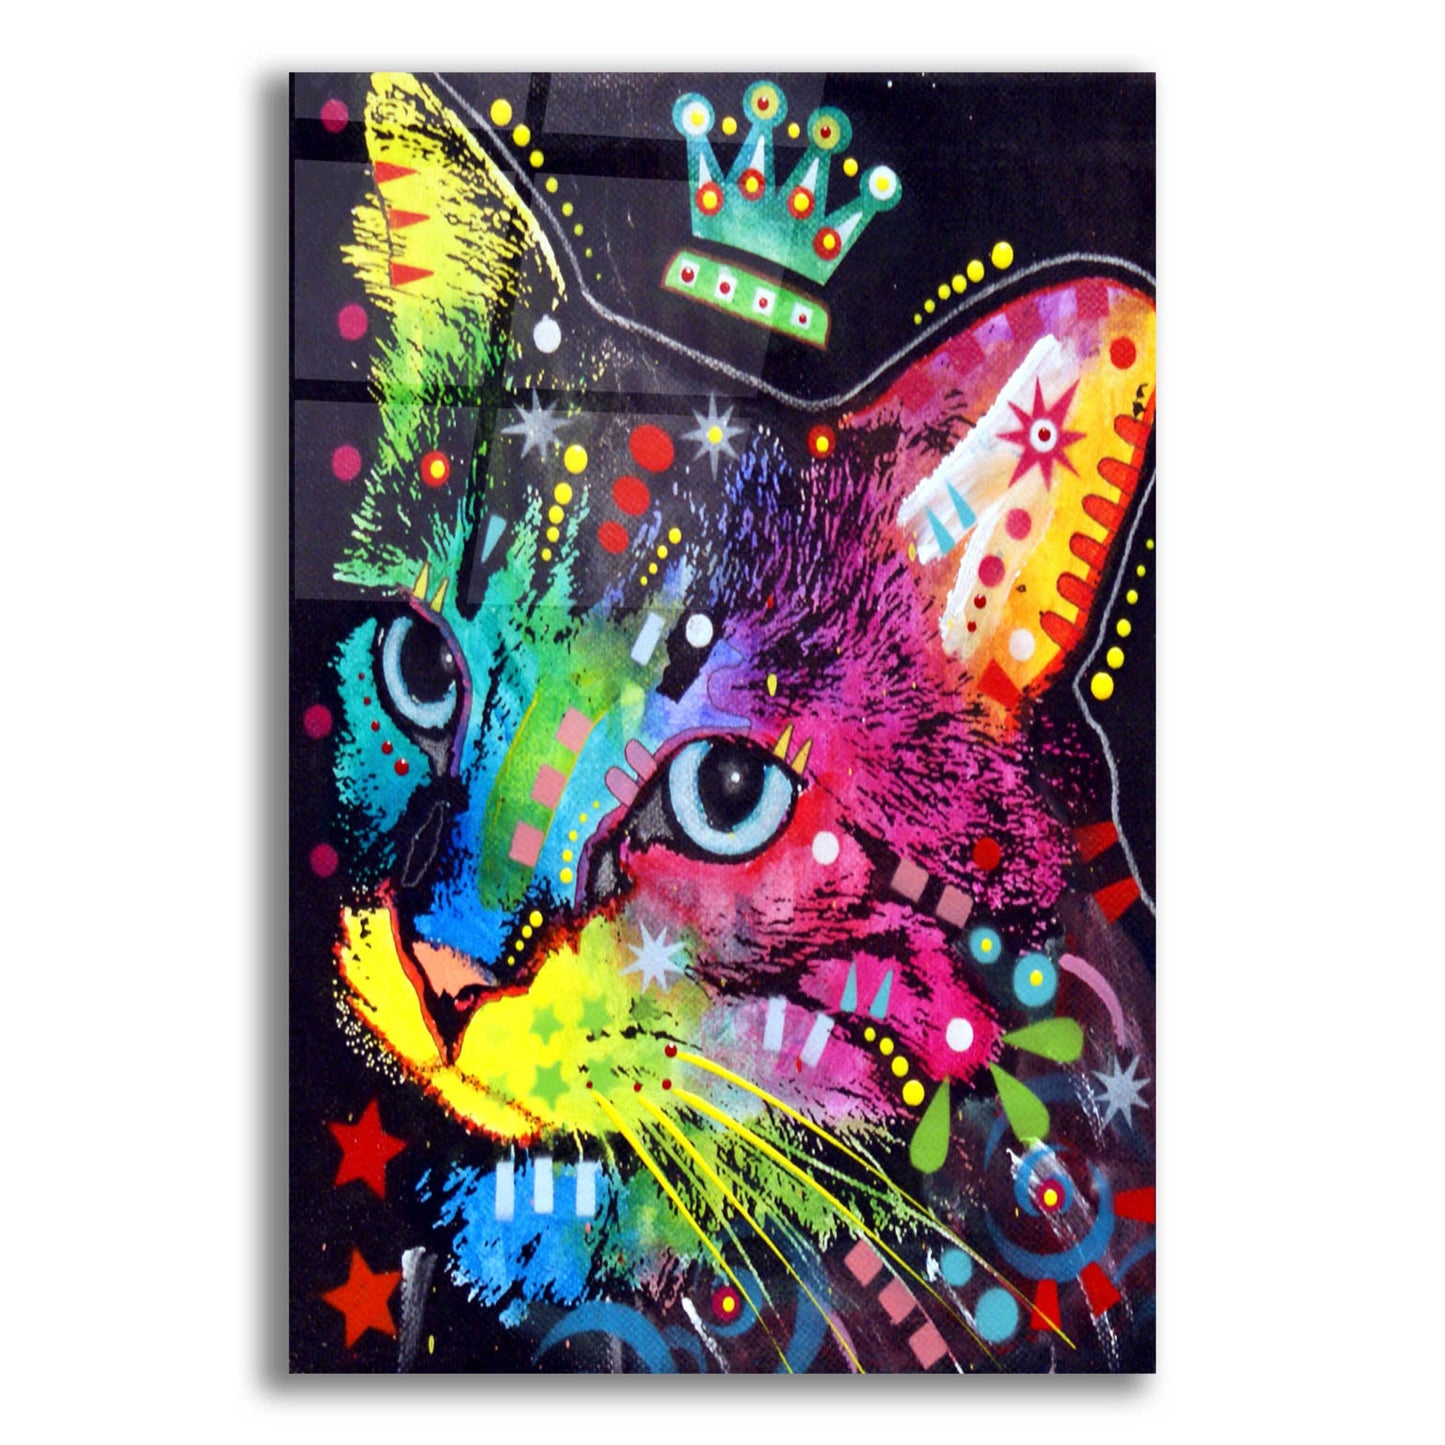 Epic Art 'Thinking Cat Crowned' by Dean Russo, Acrylic Glass Wall Art,16x24